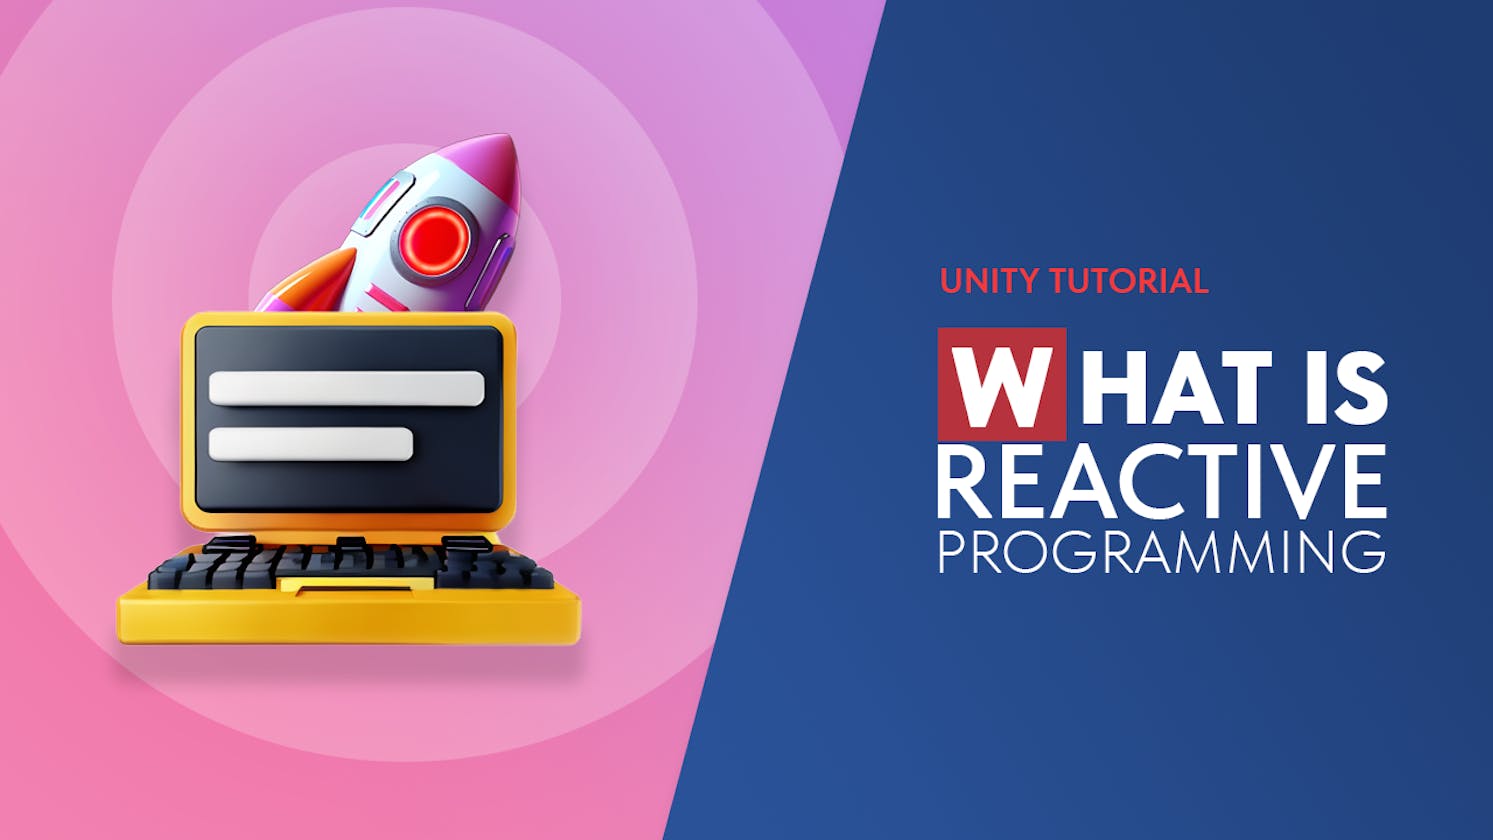 Reactive programming in Gamedev. Let's understand the approach on Unity development examples